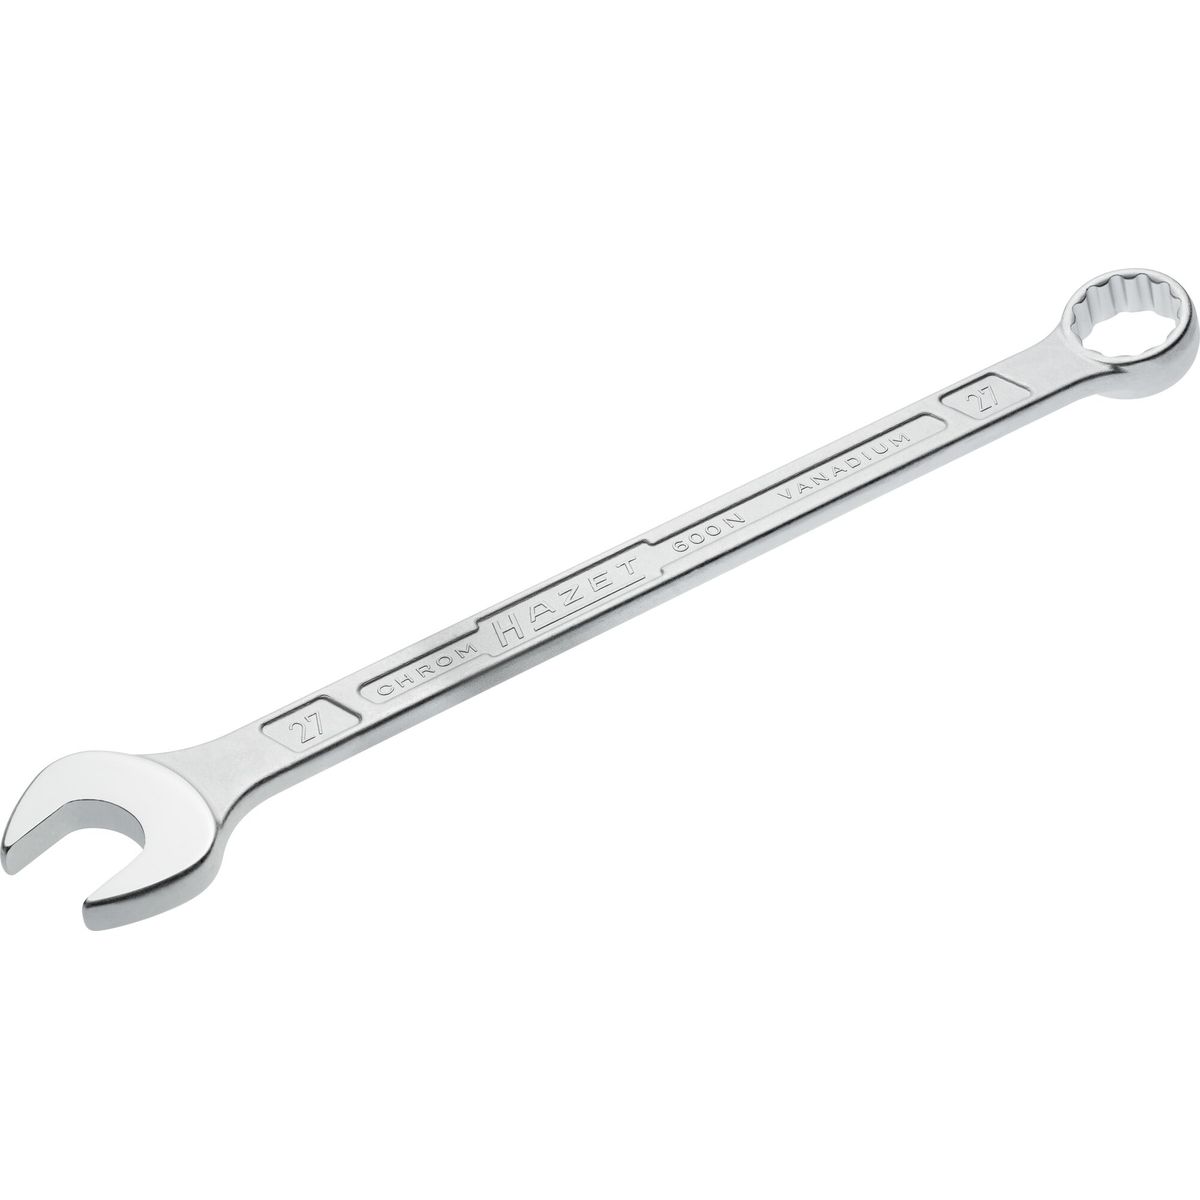 Combination Wrench No.600N-27 Hazet®